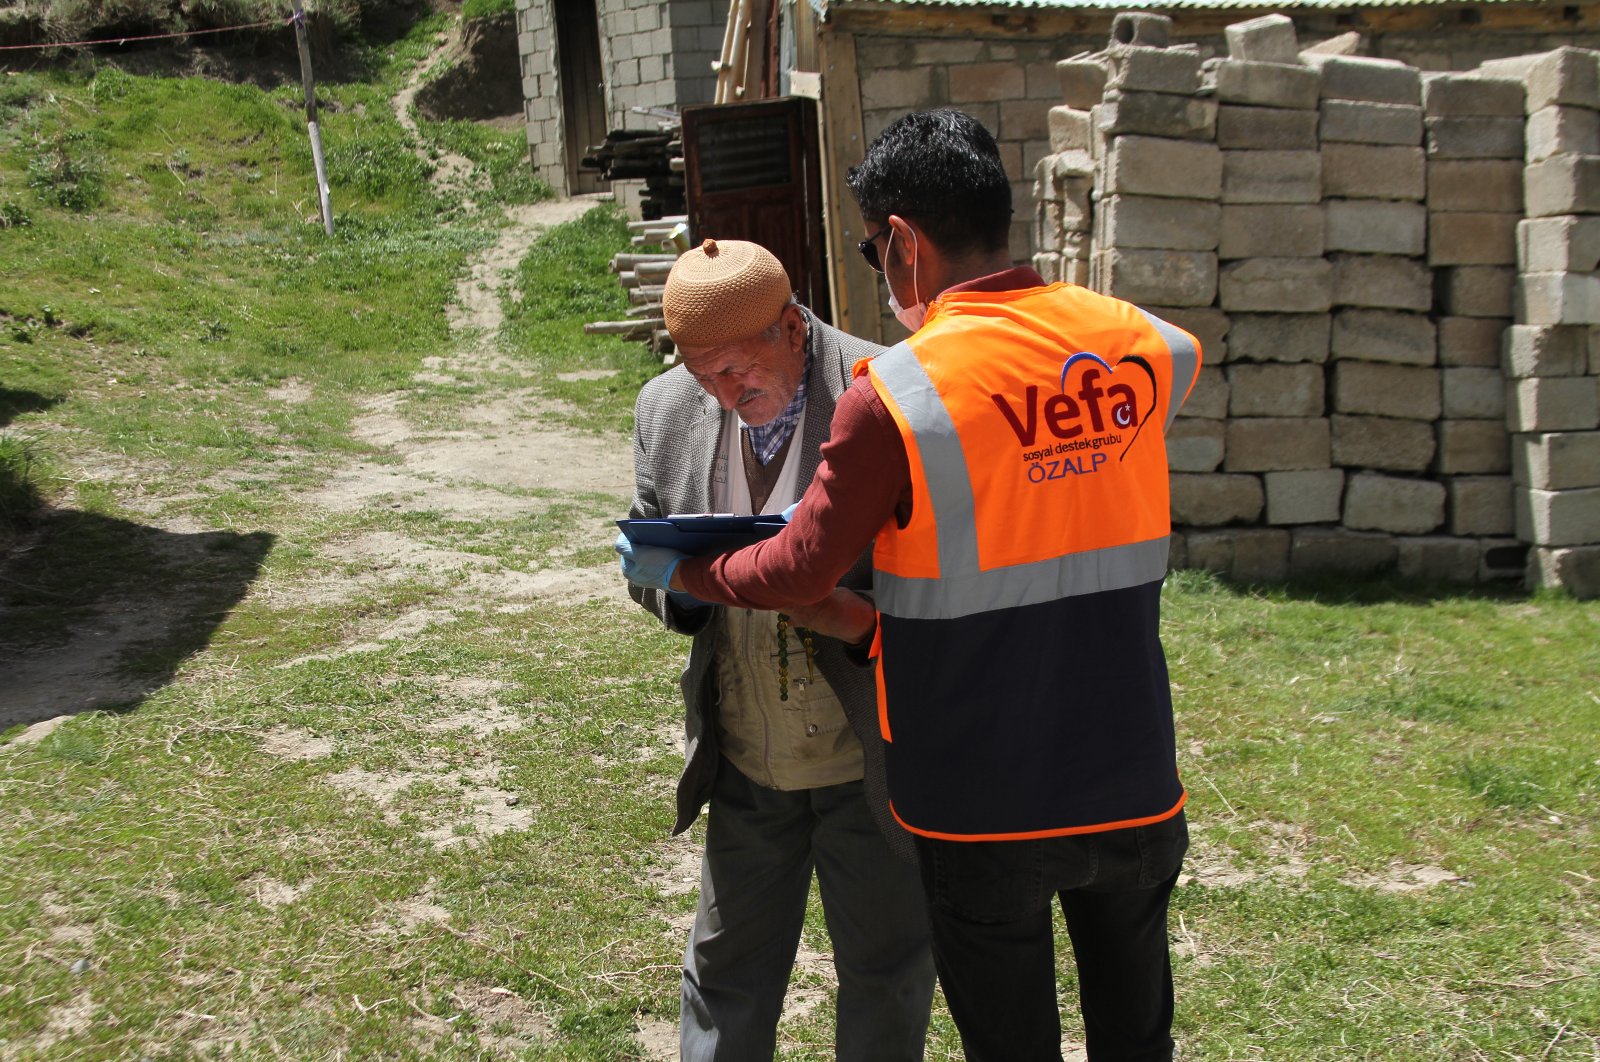 A Vefa Social Support Group volunteer distributes aid to an old man, Van, May 18, 2020. (AA)